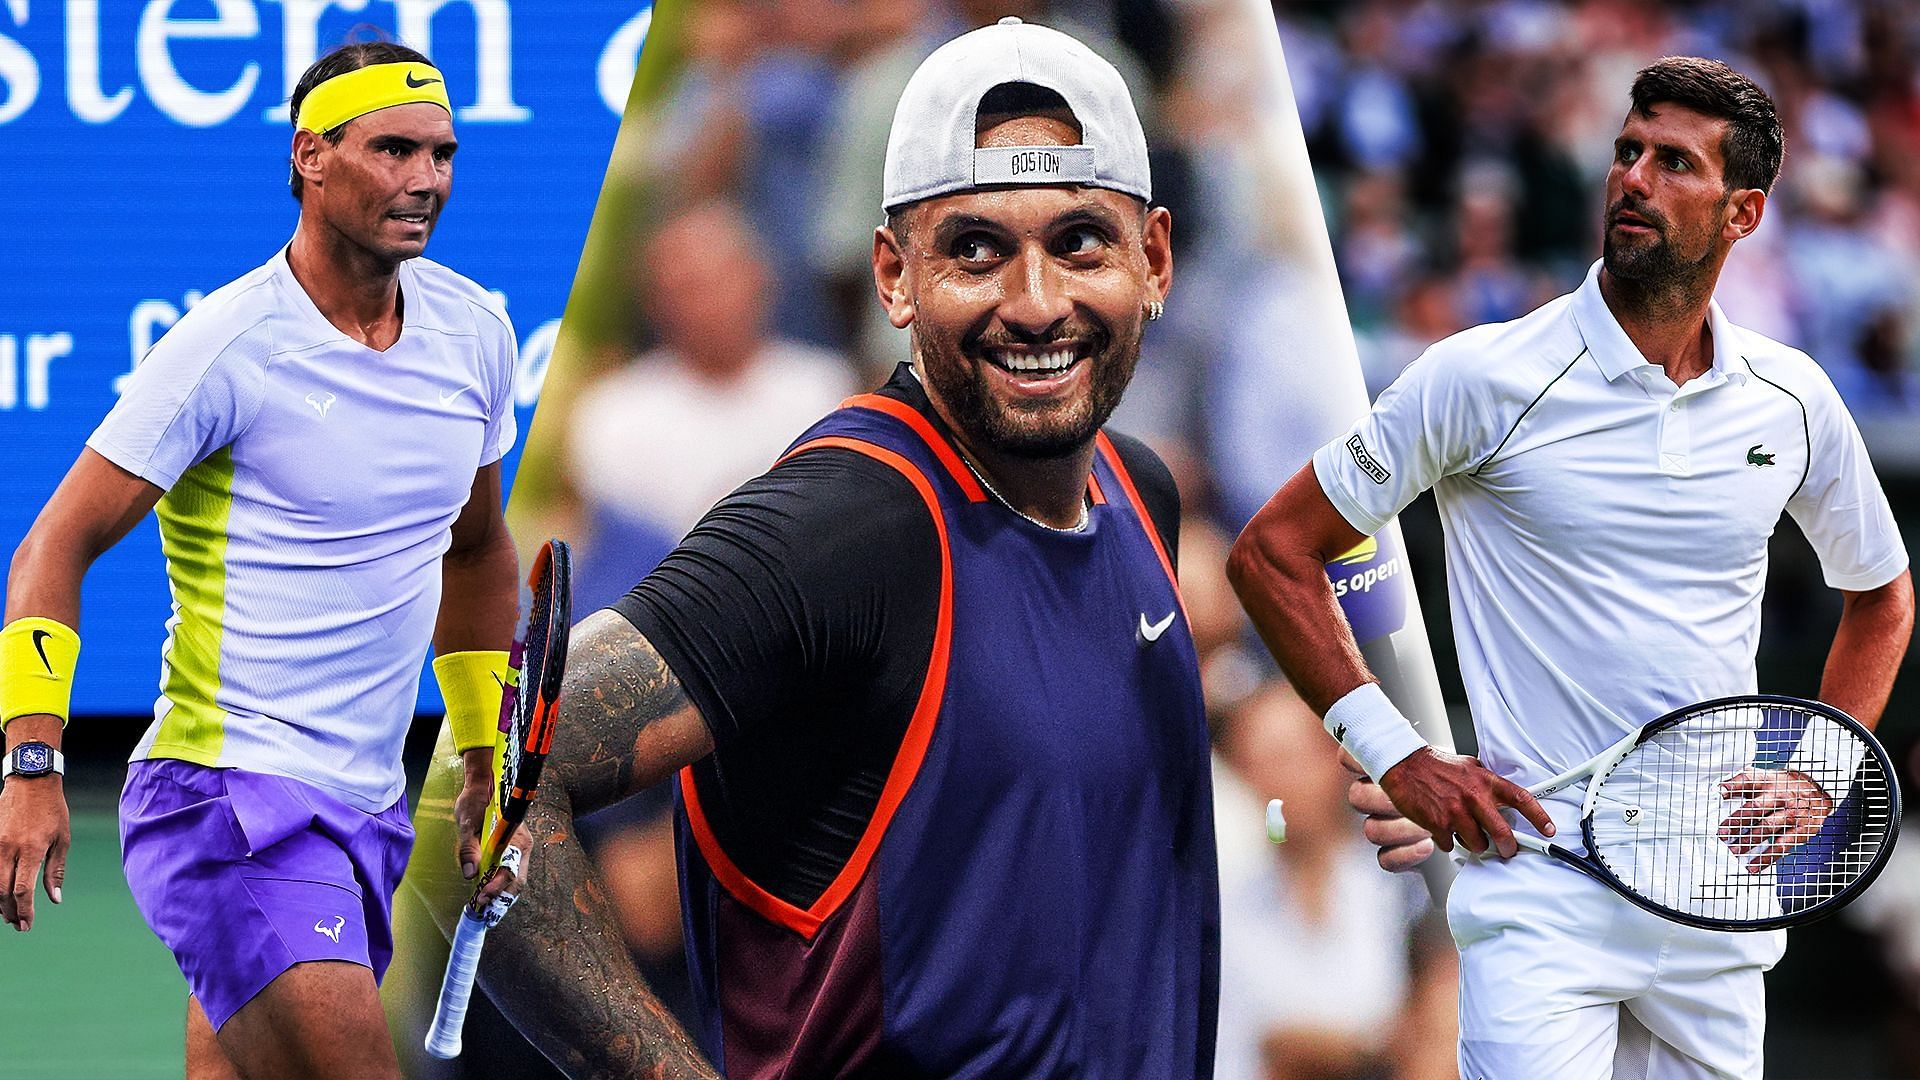 Nick Kyrgios is happy to be in the same conversation as Rafael Nadal and Novak Djokovic